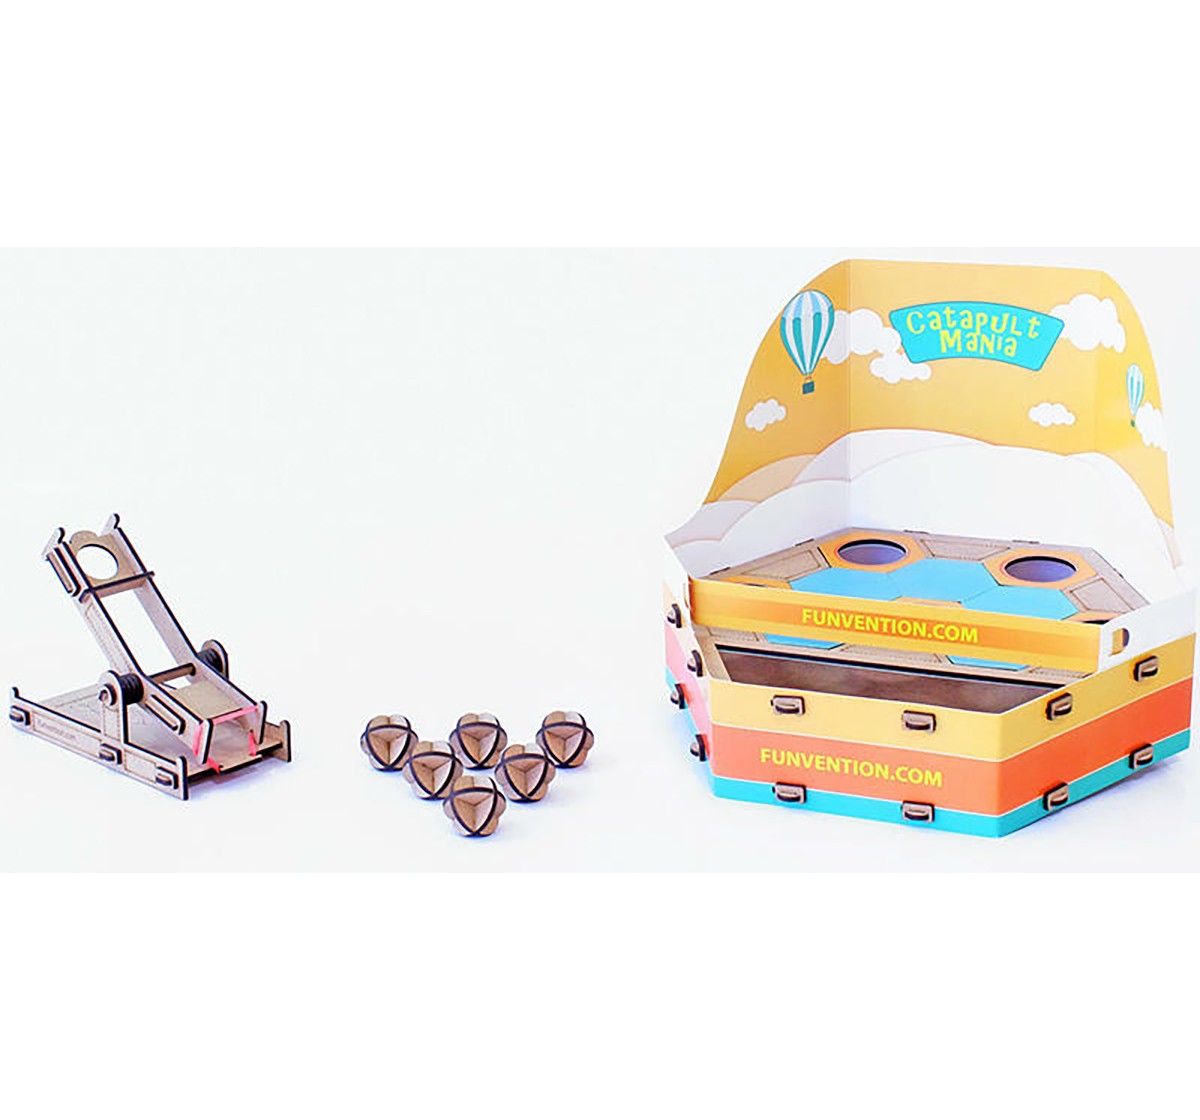 Funvention Catapult Mania Stem for Kids Age 5Y+